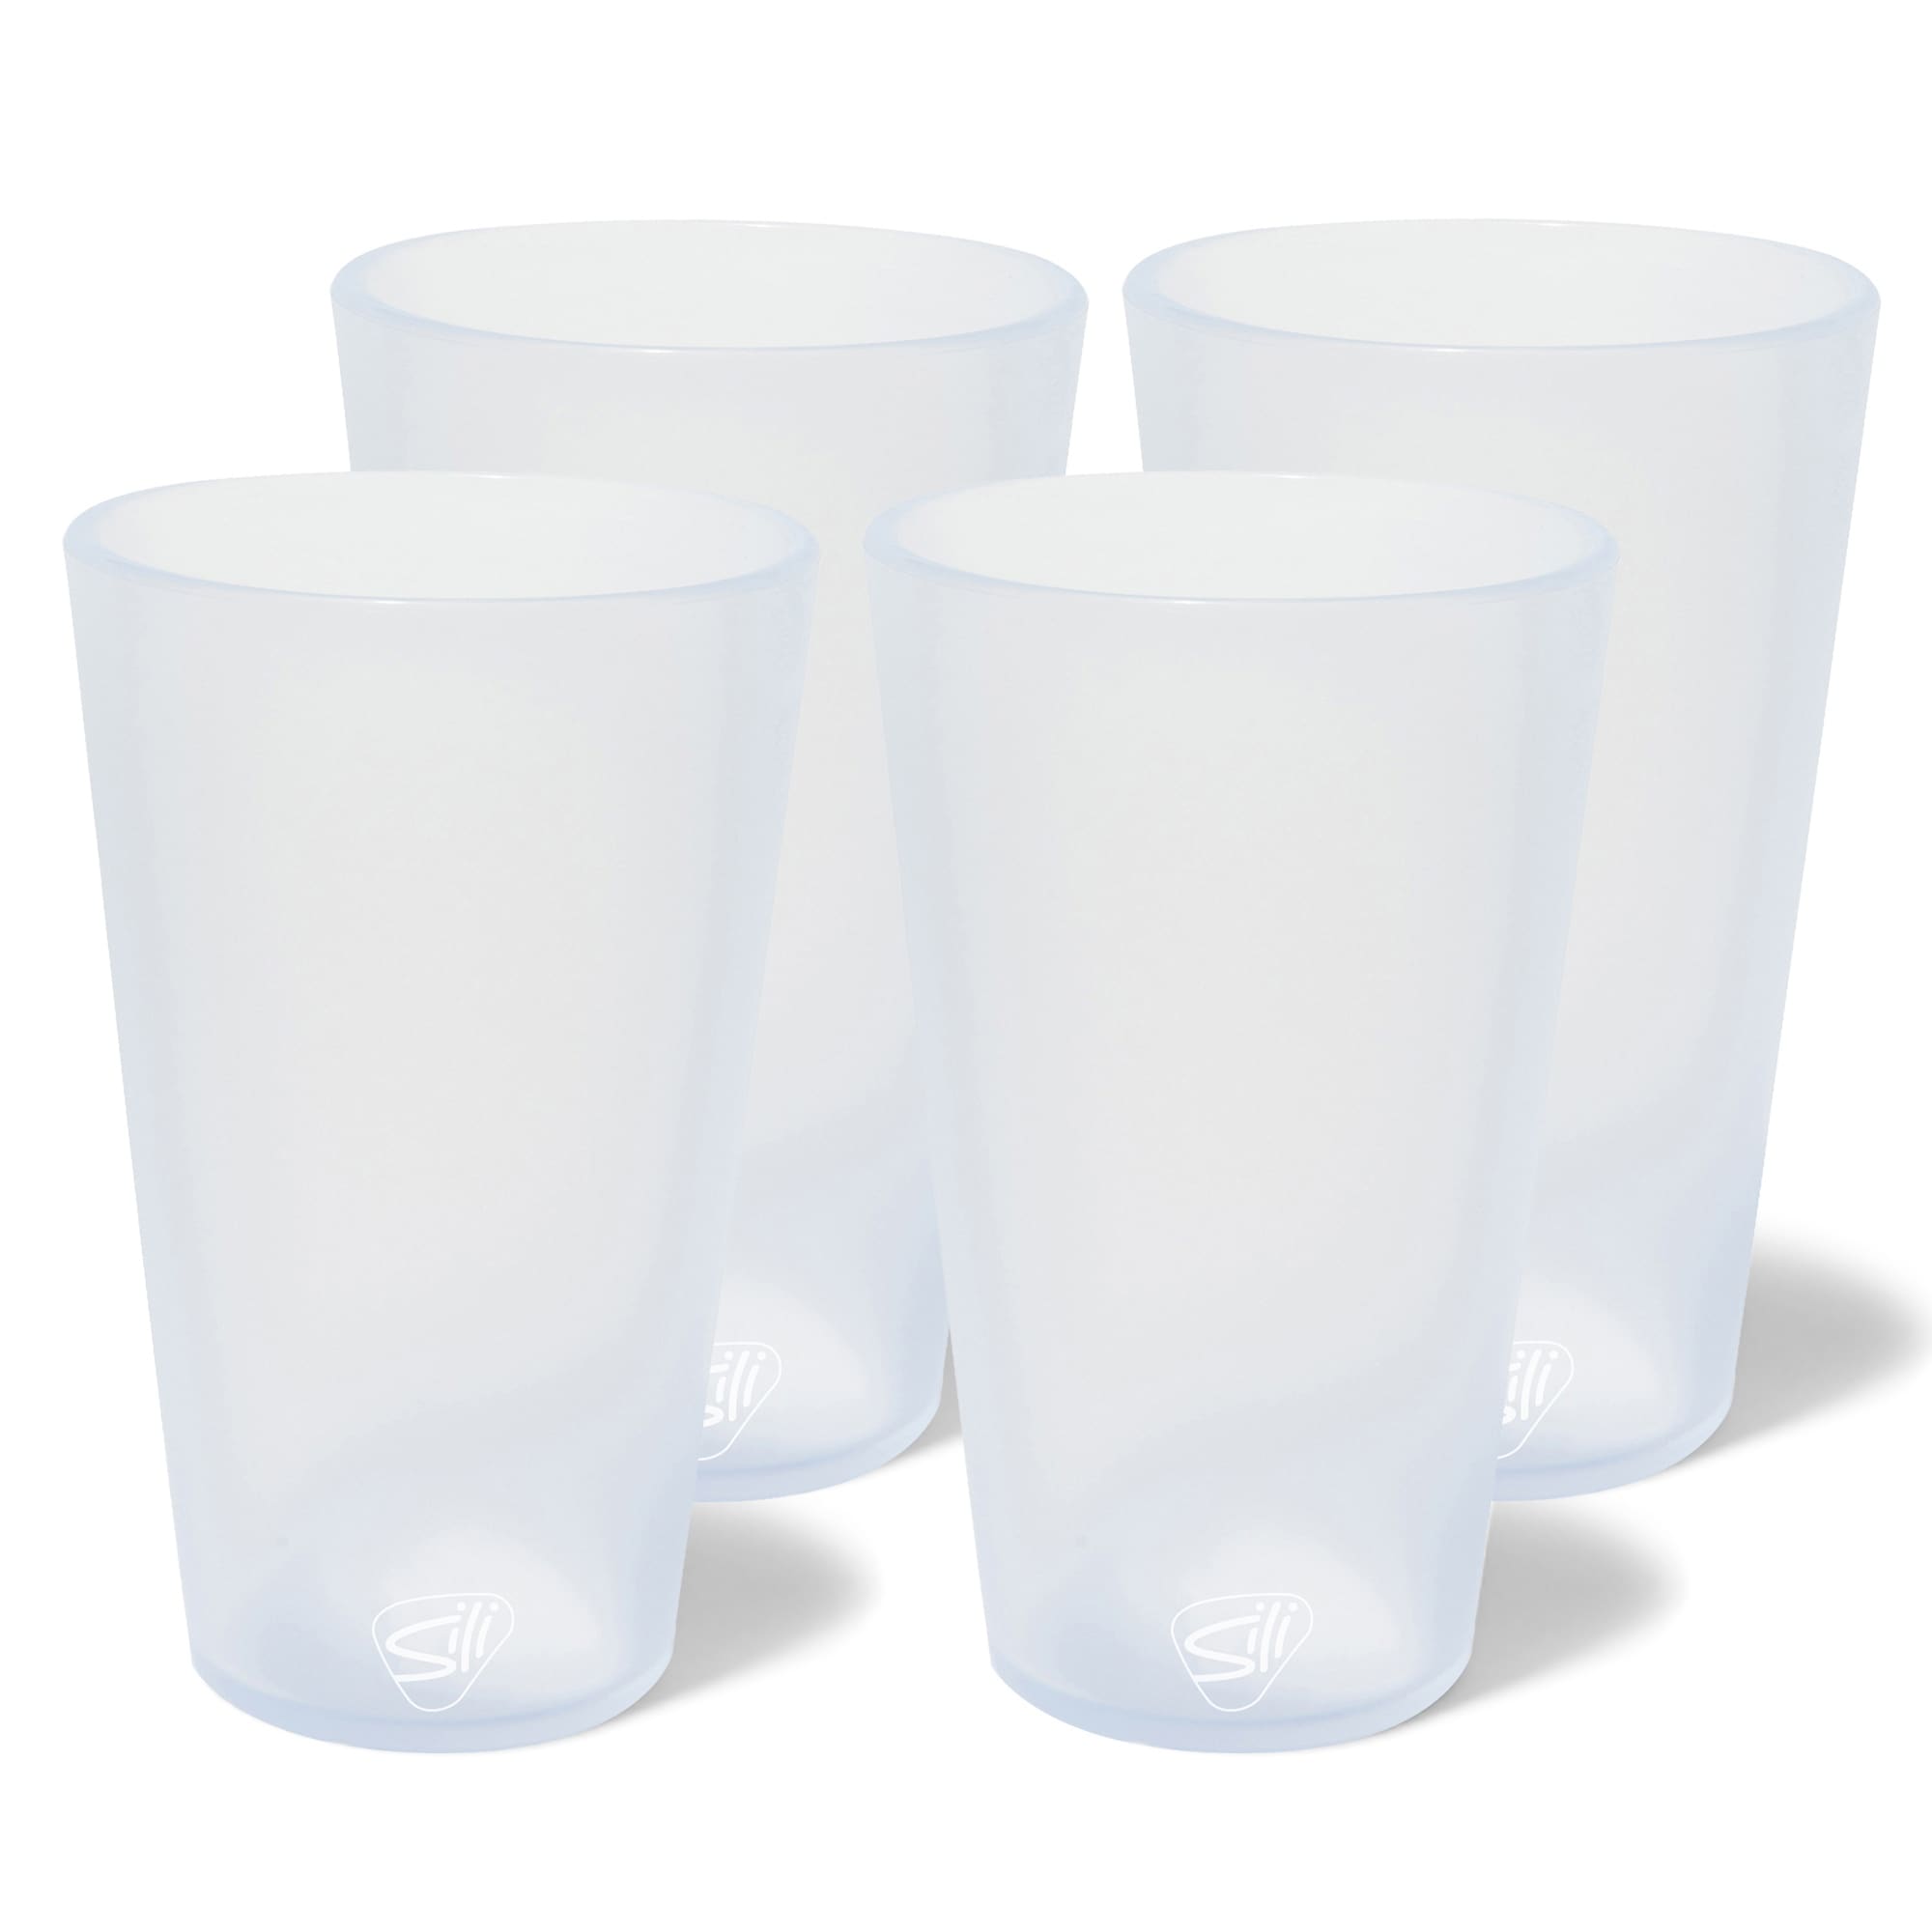 Parts Plastic Cup Shatterproof Silicone Transparent Unbreakable WINE GLASSES